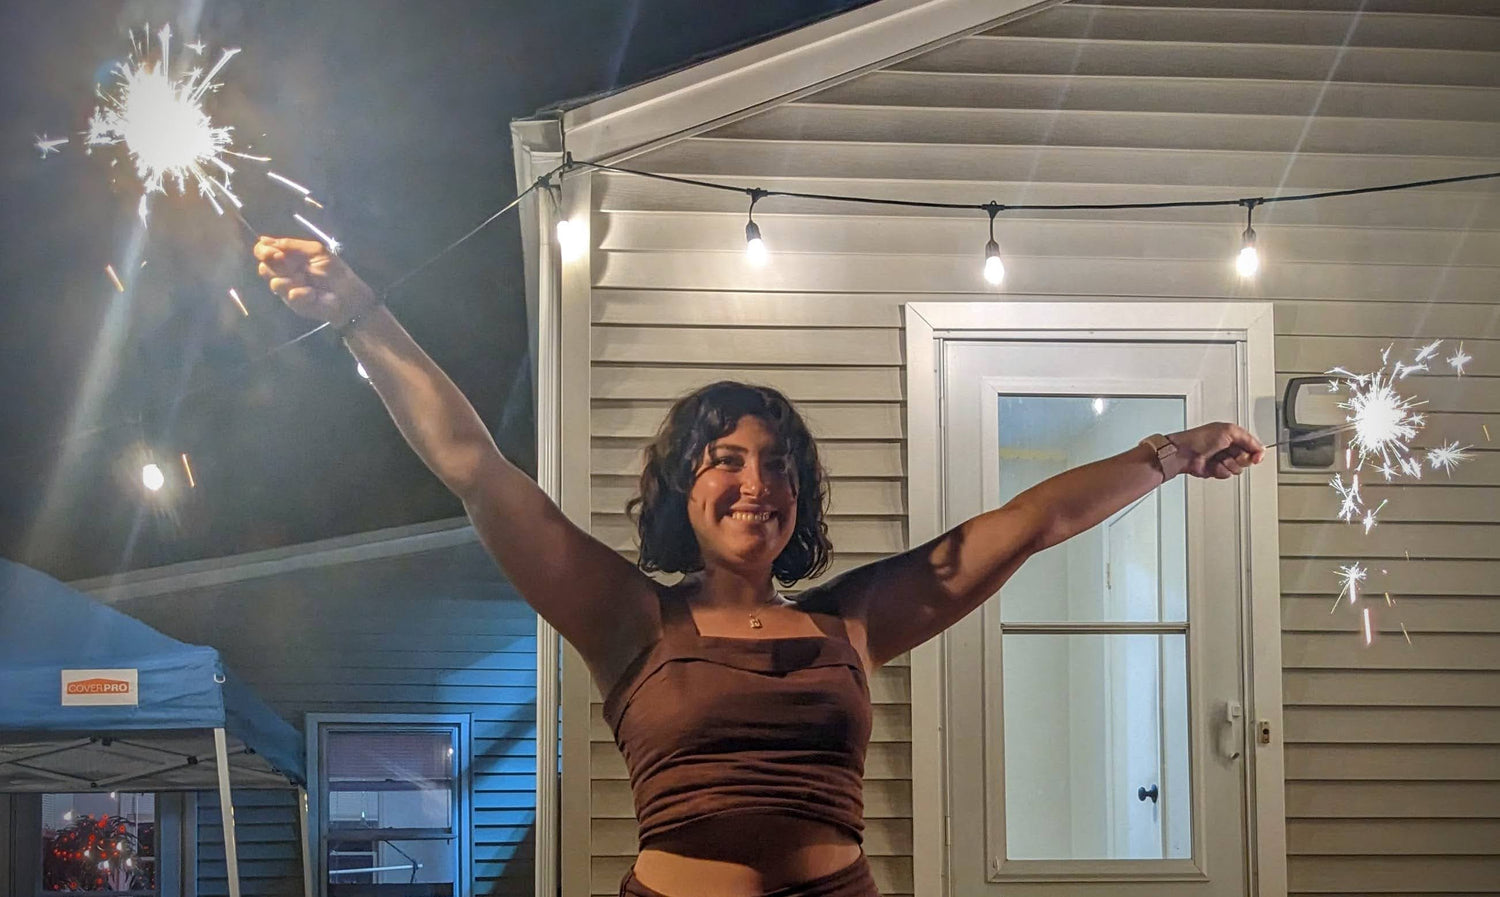 Kristen holding two sparklers at night in a backyard.